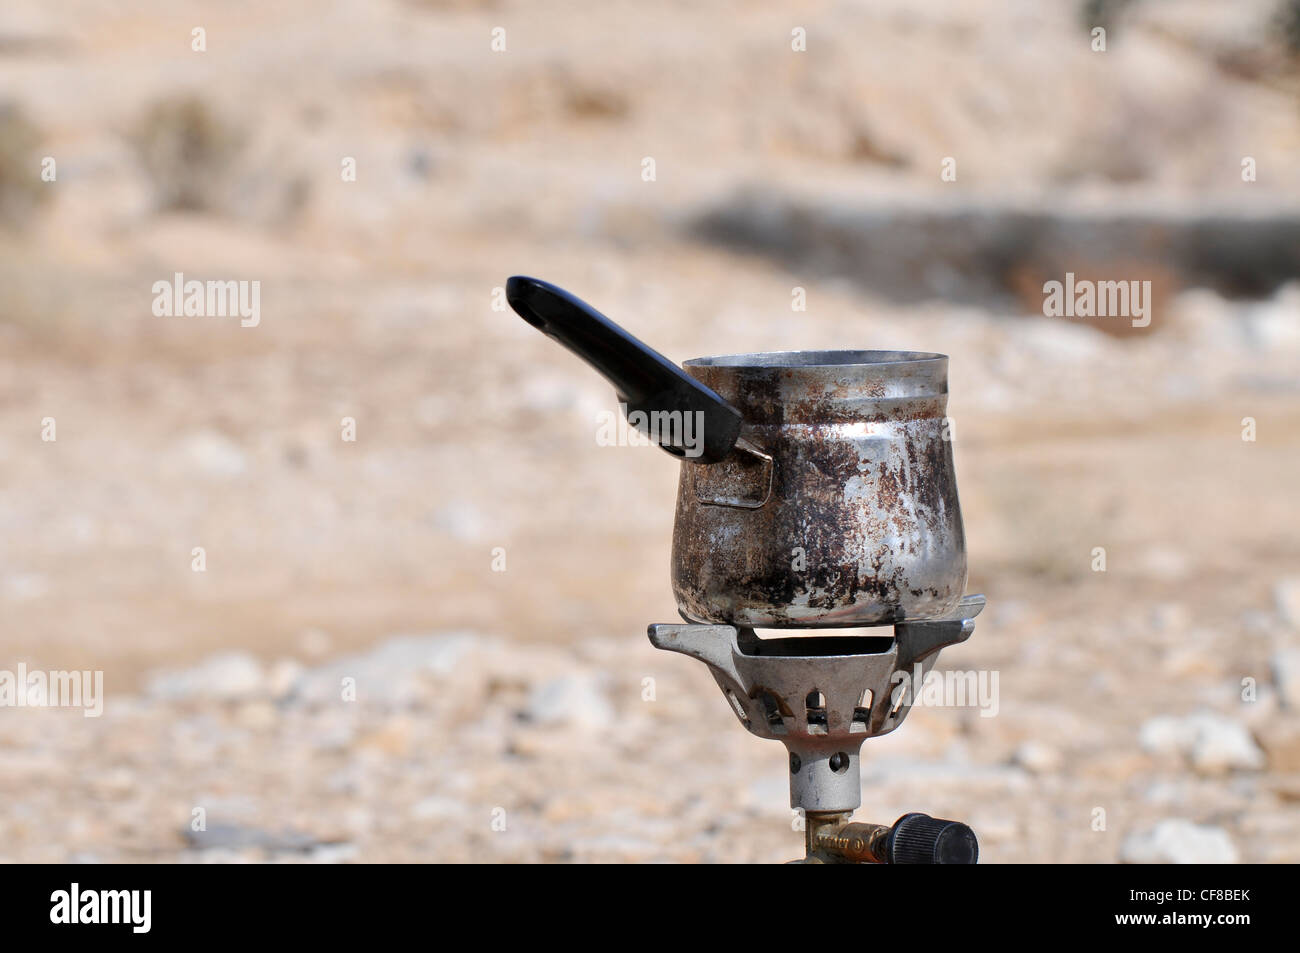 Israel, Arava, Outdoor cooking boiling water for tea Stock Photo